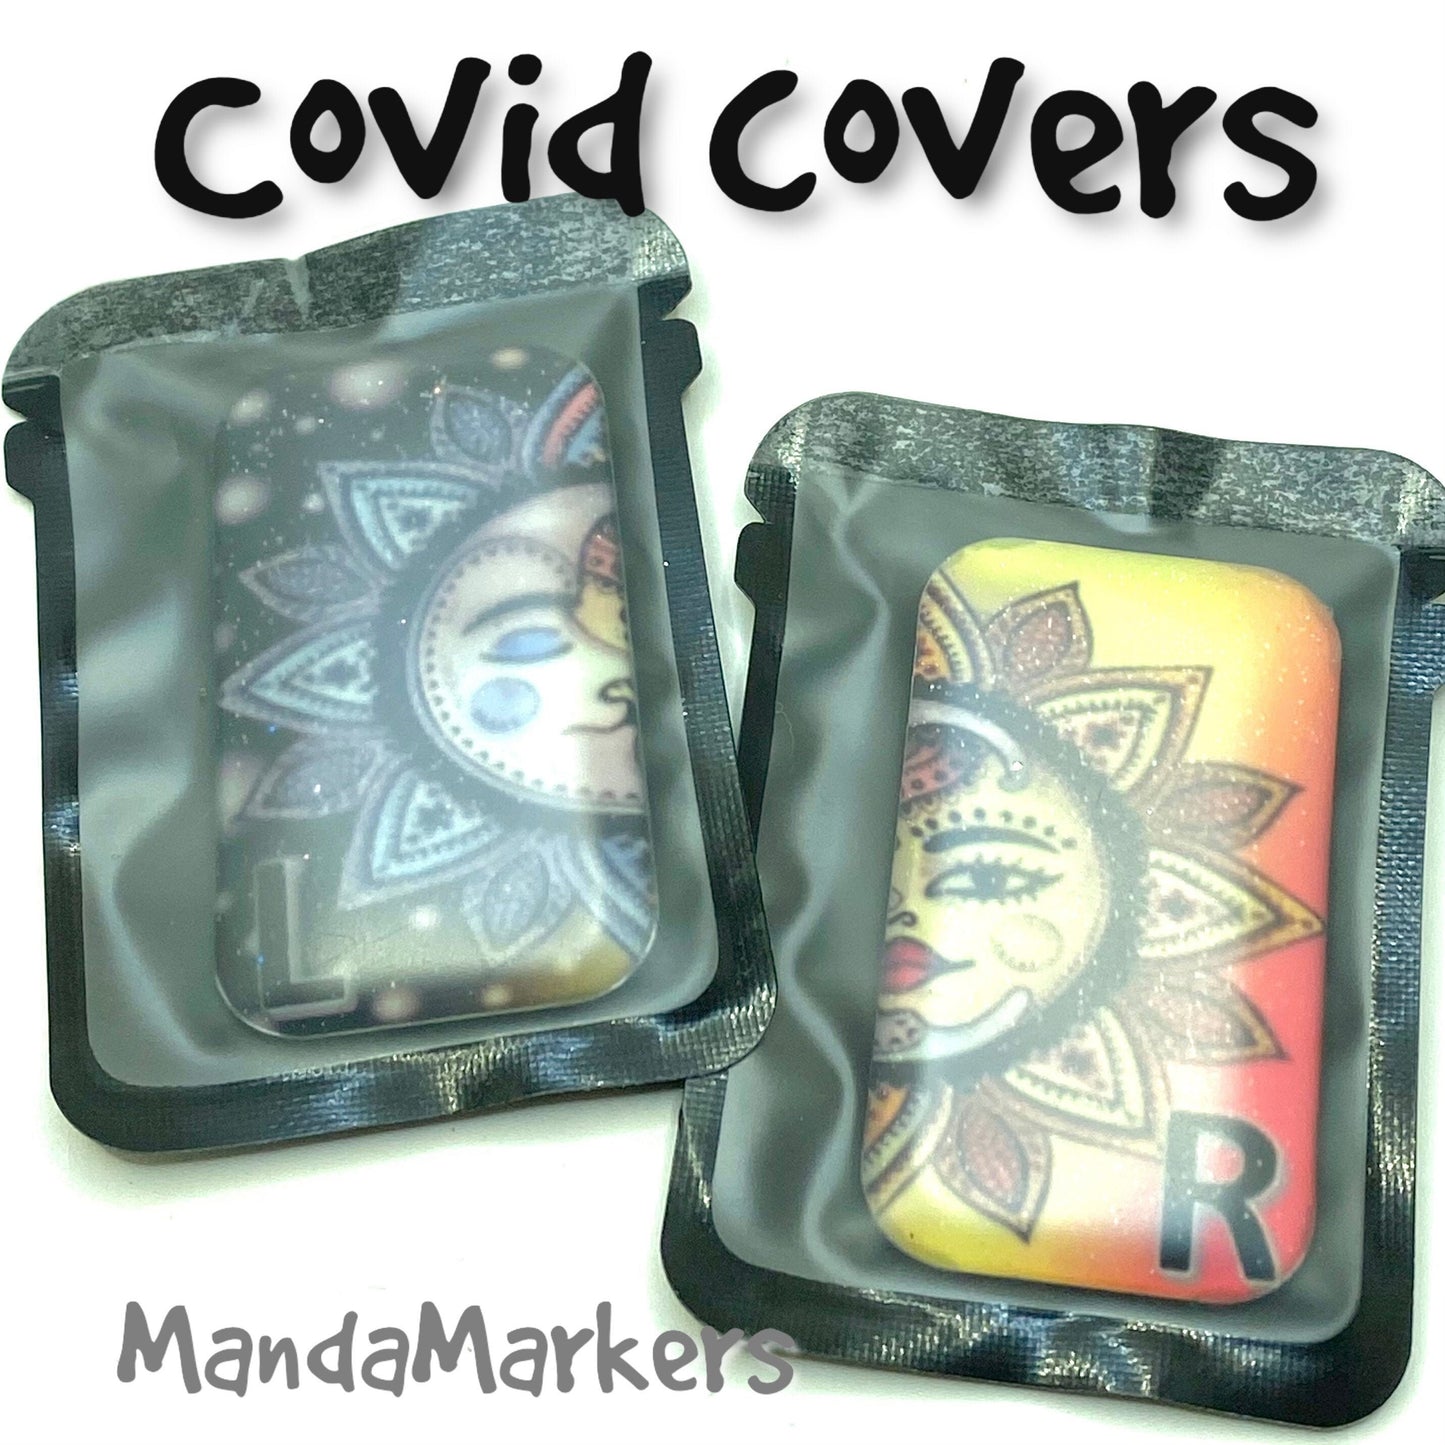 Covid covers for your Xray markers